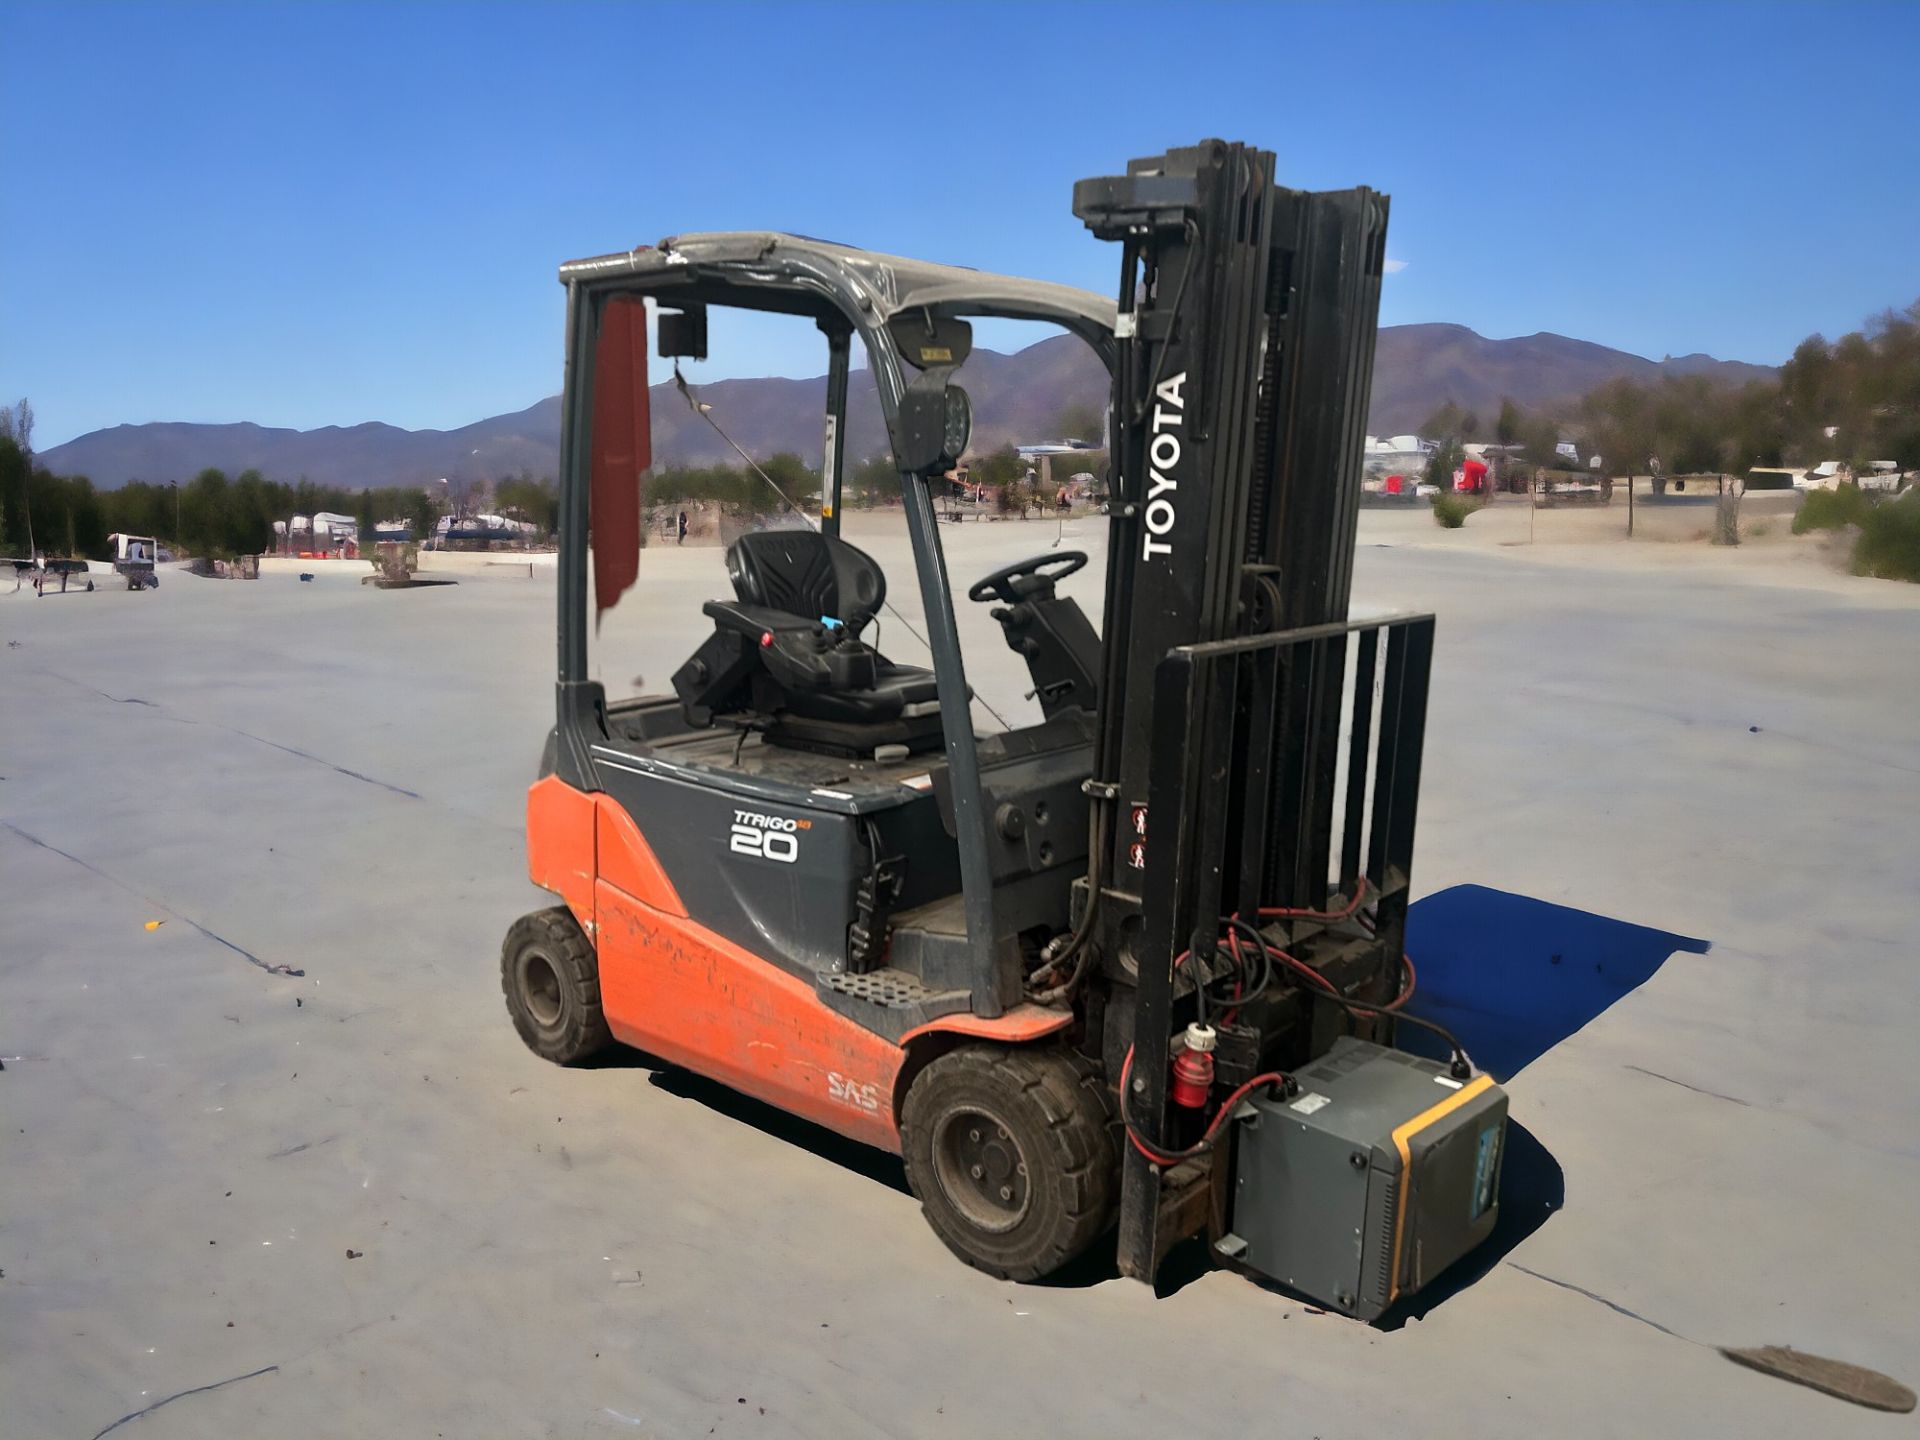 TOYOTA 8FBM20T ELECTRIC FORKLIFT - EFFICIENT MATERIAL HANDLING SOLUTION **(INCLUDES CHARGER)** - Image 2 of 4